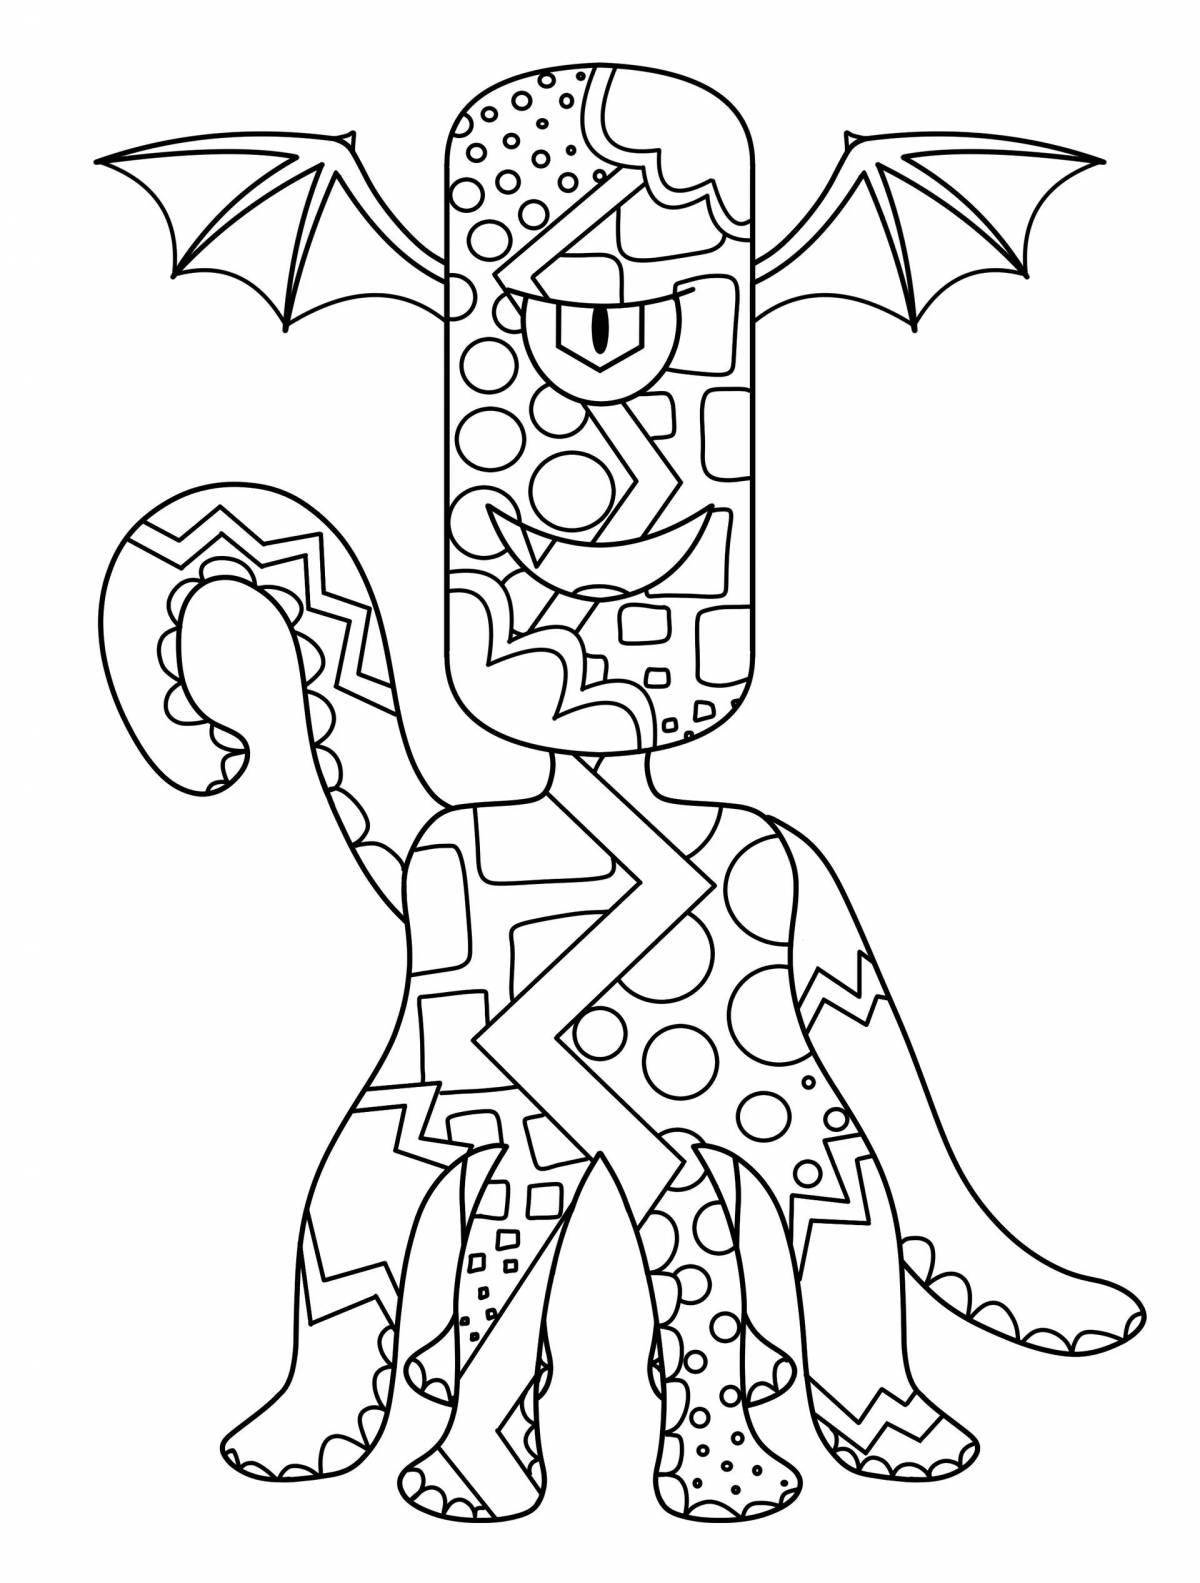 Violent musical monsters coloring page